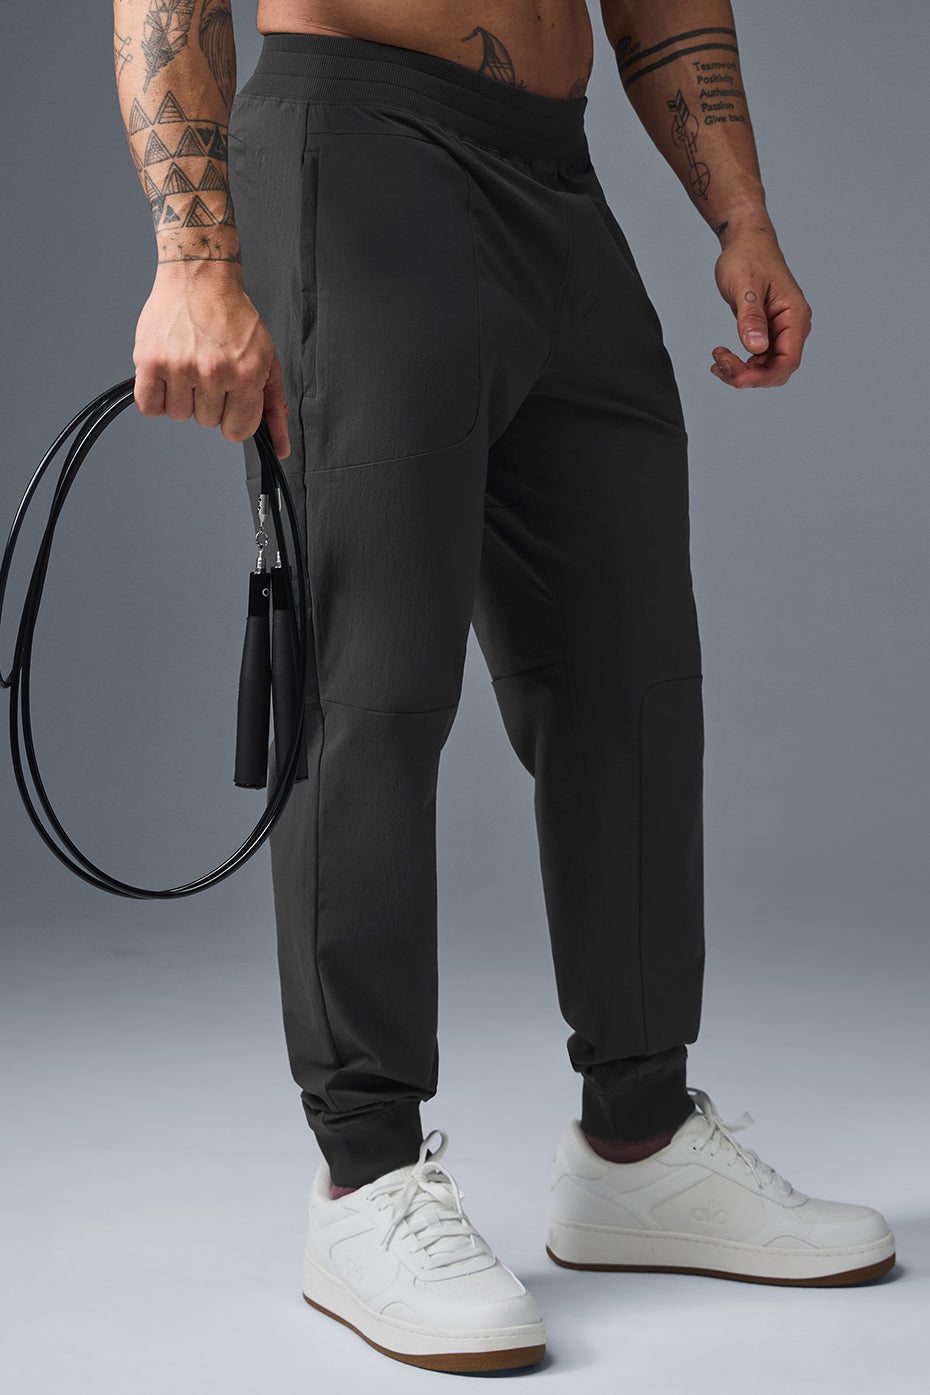 Co-Op Pant - Anthracite